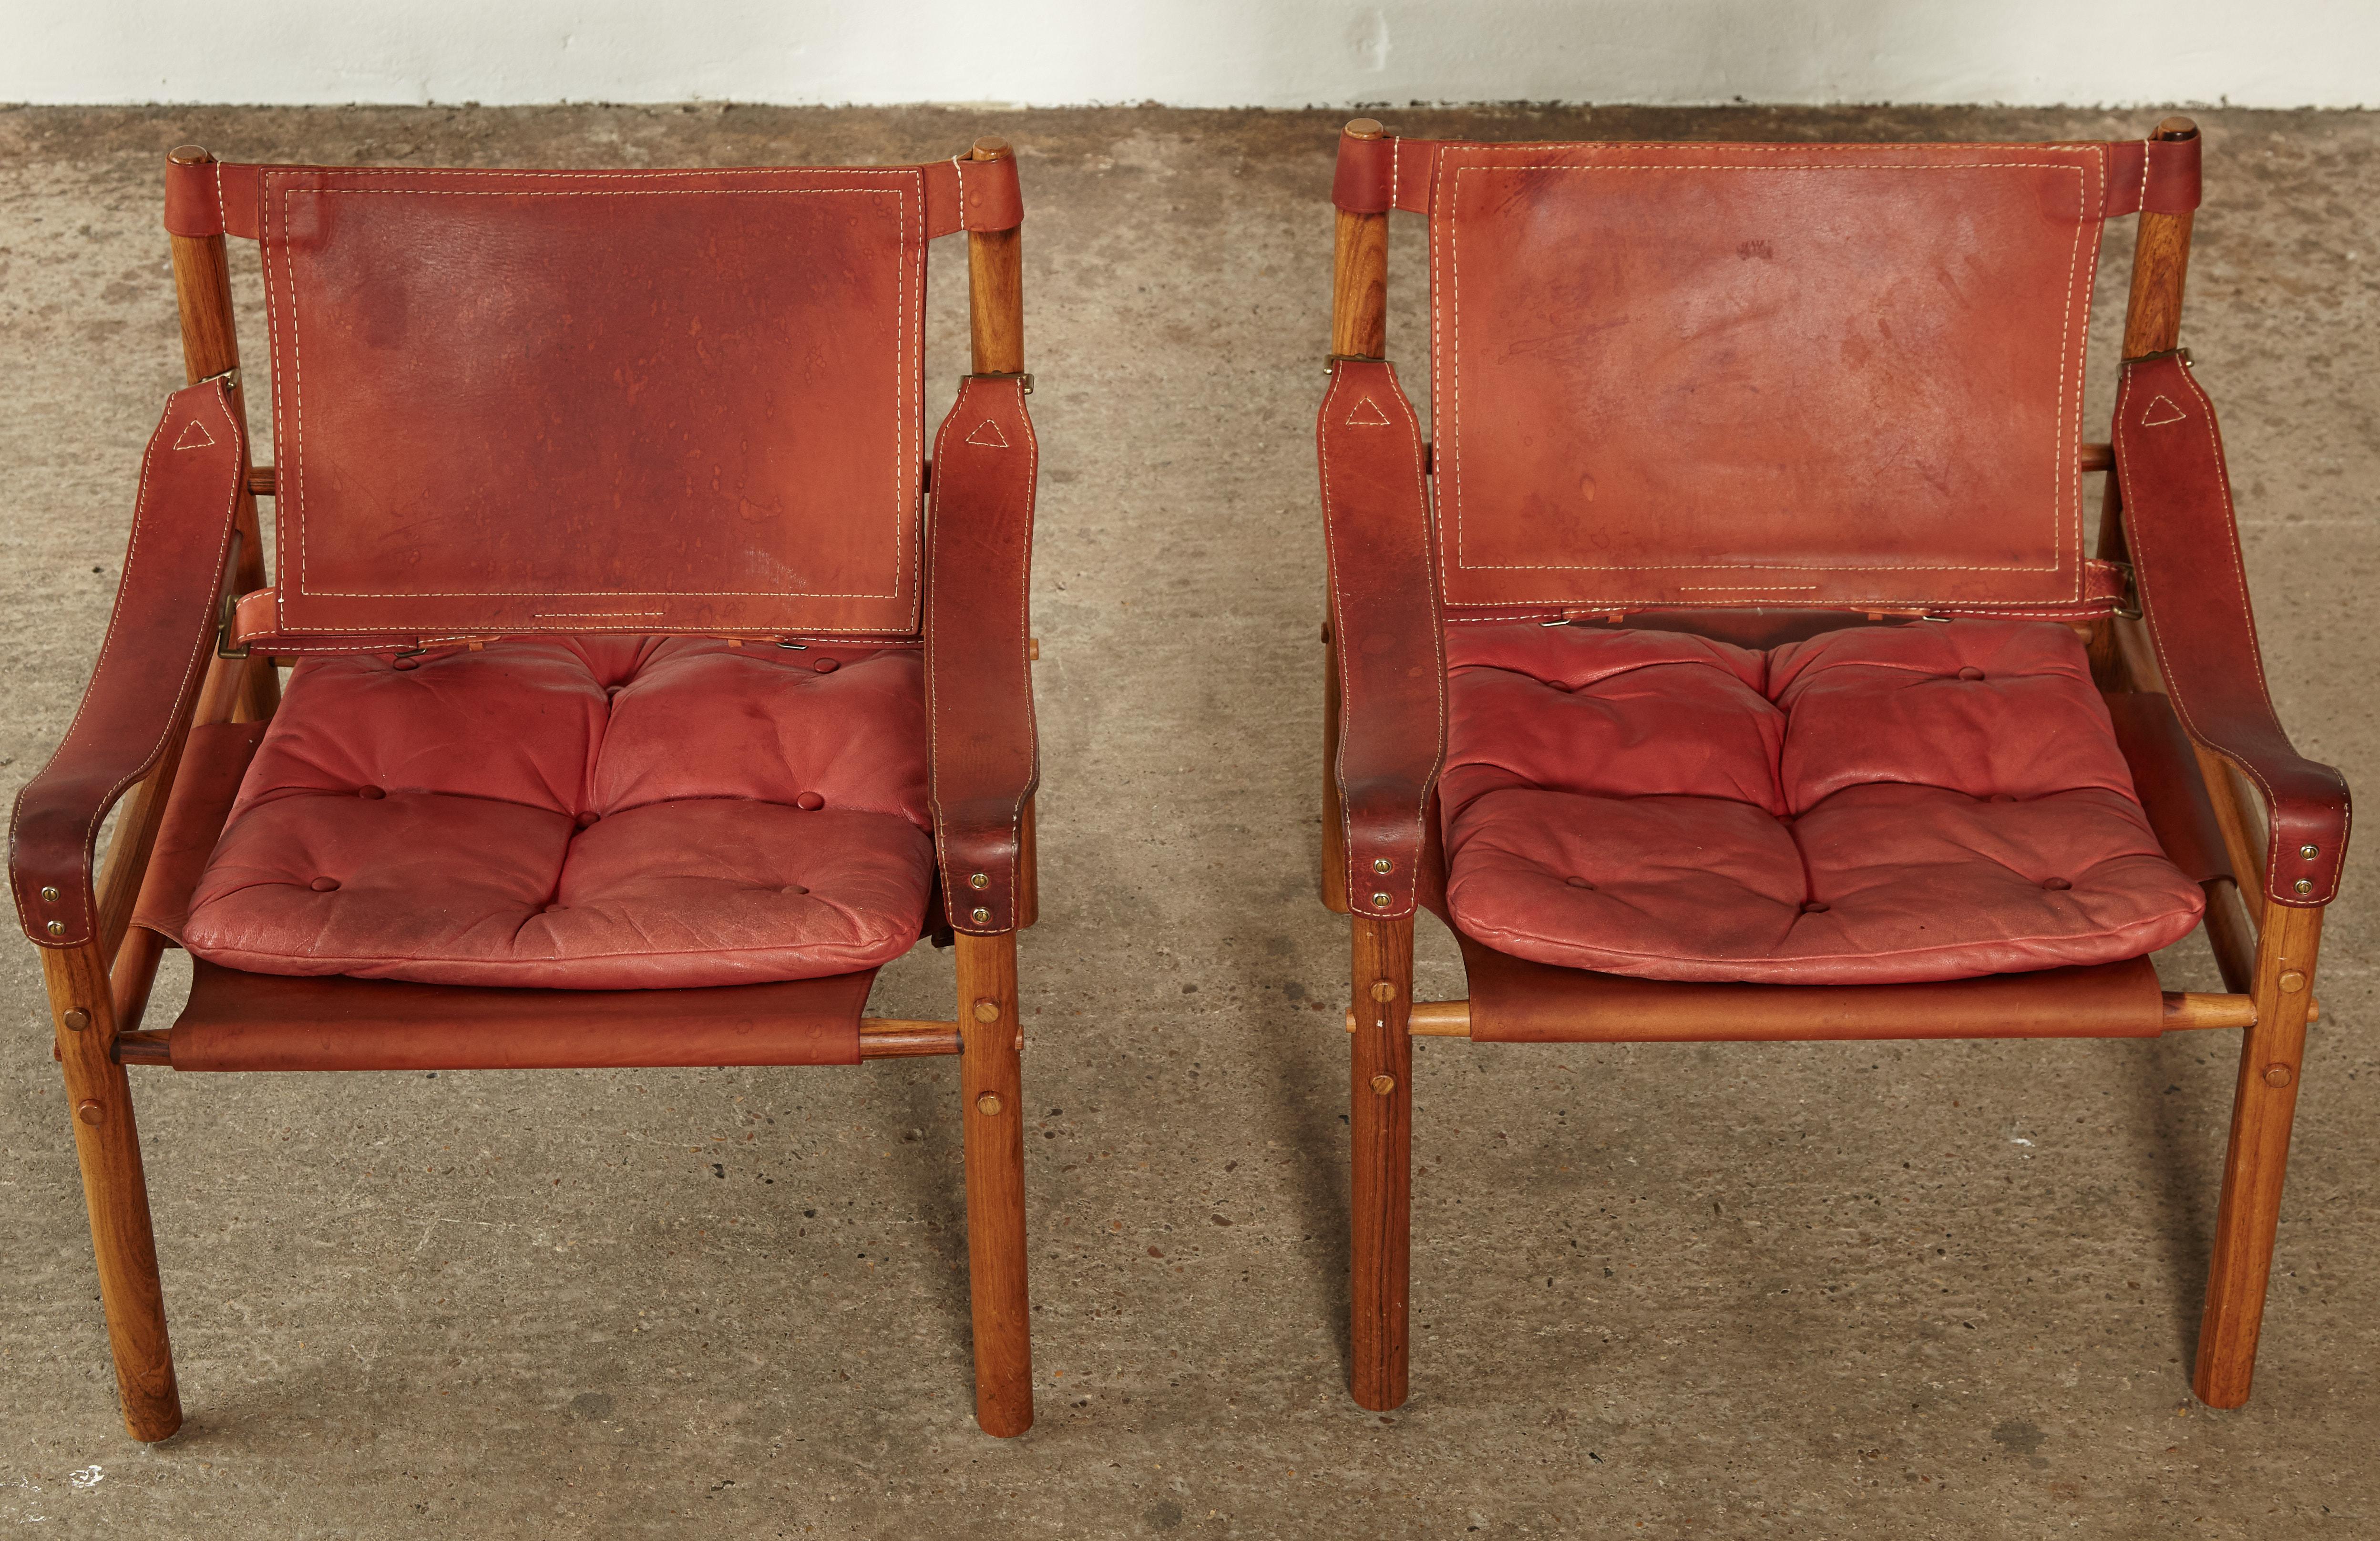 Arne Norell Rosewood and Leather Safari Sirocco Chairs, Sweden, 1960s 1